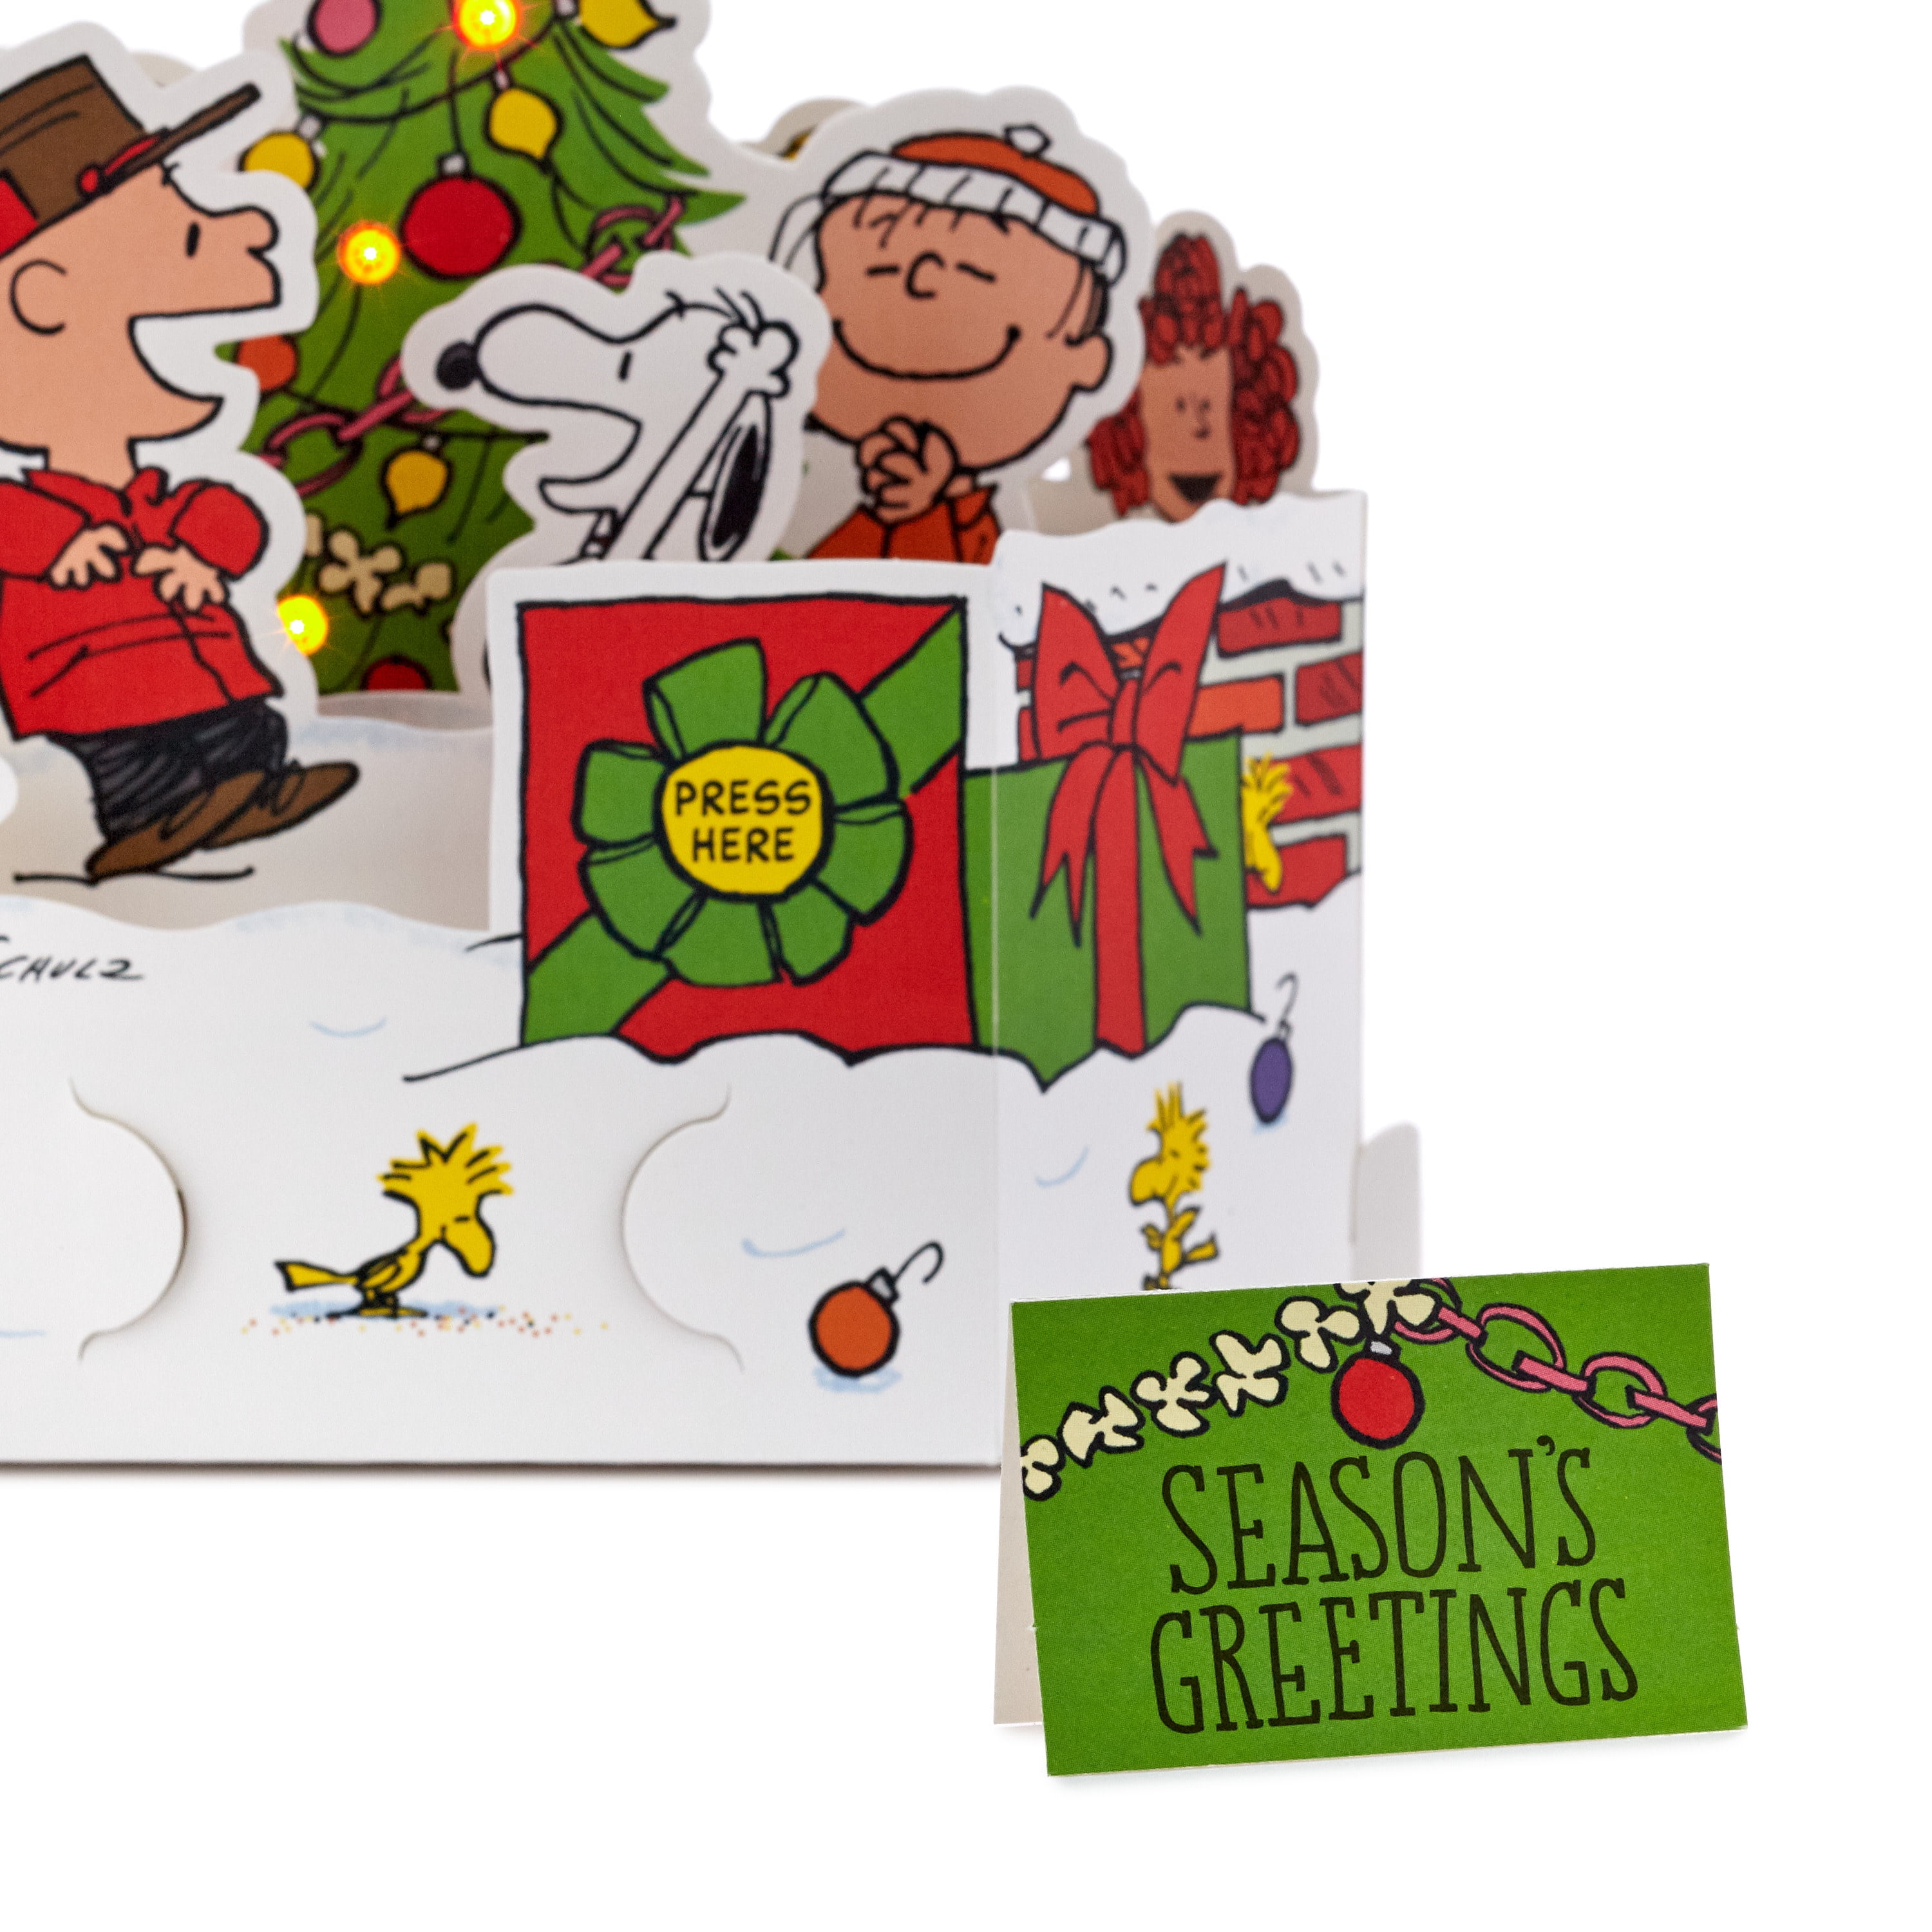 Charlie Brown Christmas Tree, Plays Christmastime is Here Hallmark Paper Wonder Peanuts Displayable Pop Up Christmas Card with Light and Sound